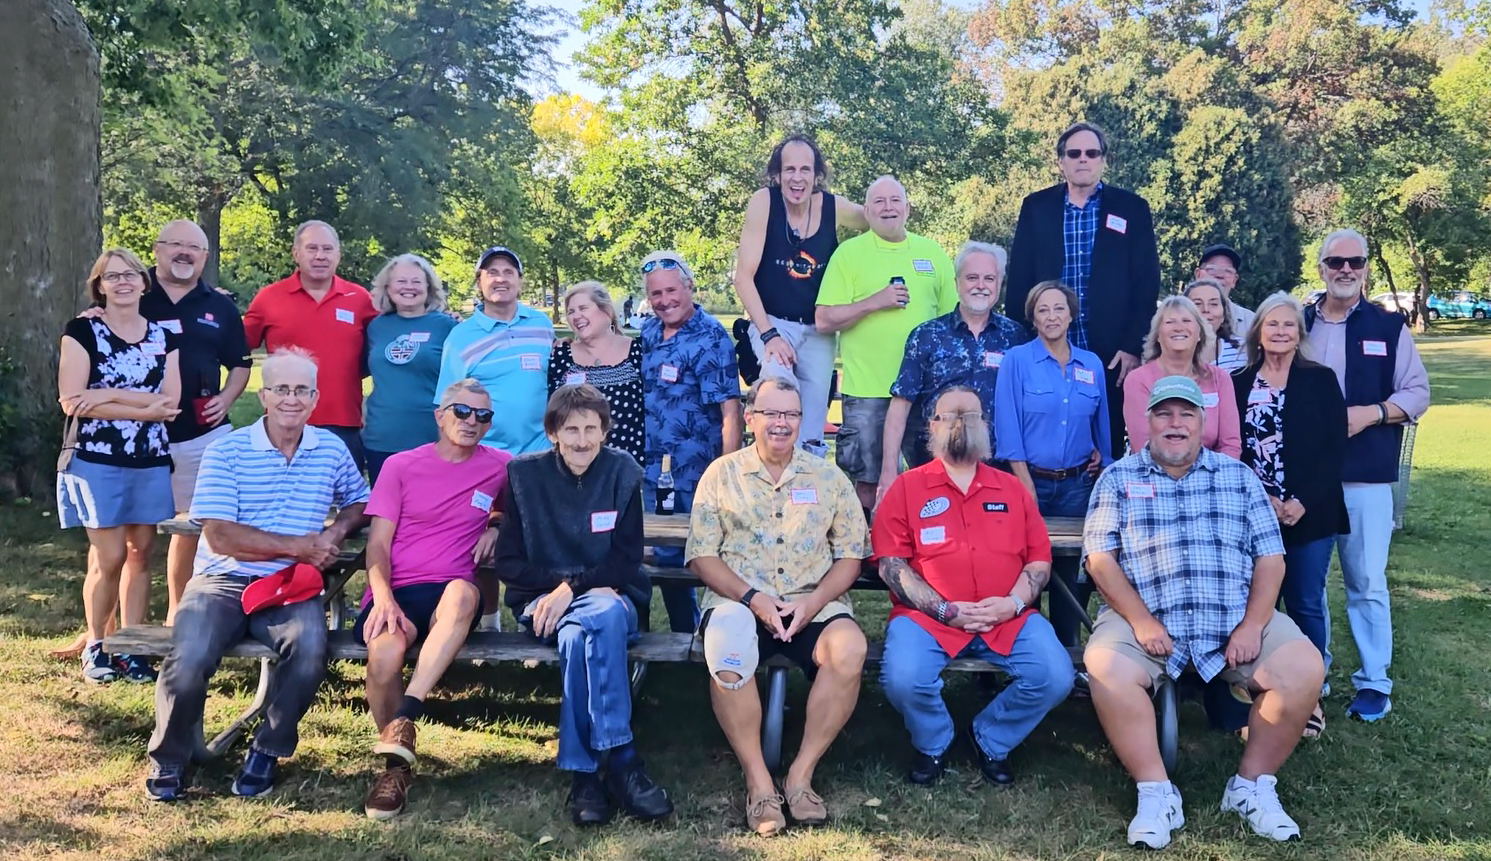 47th Medicare Reunion Group Picture